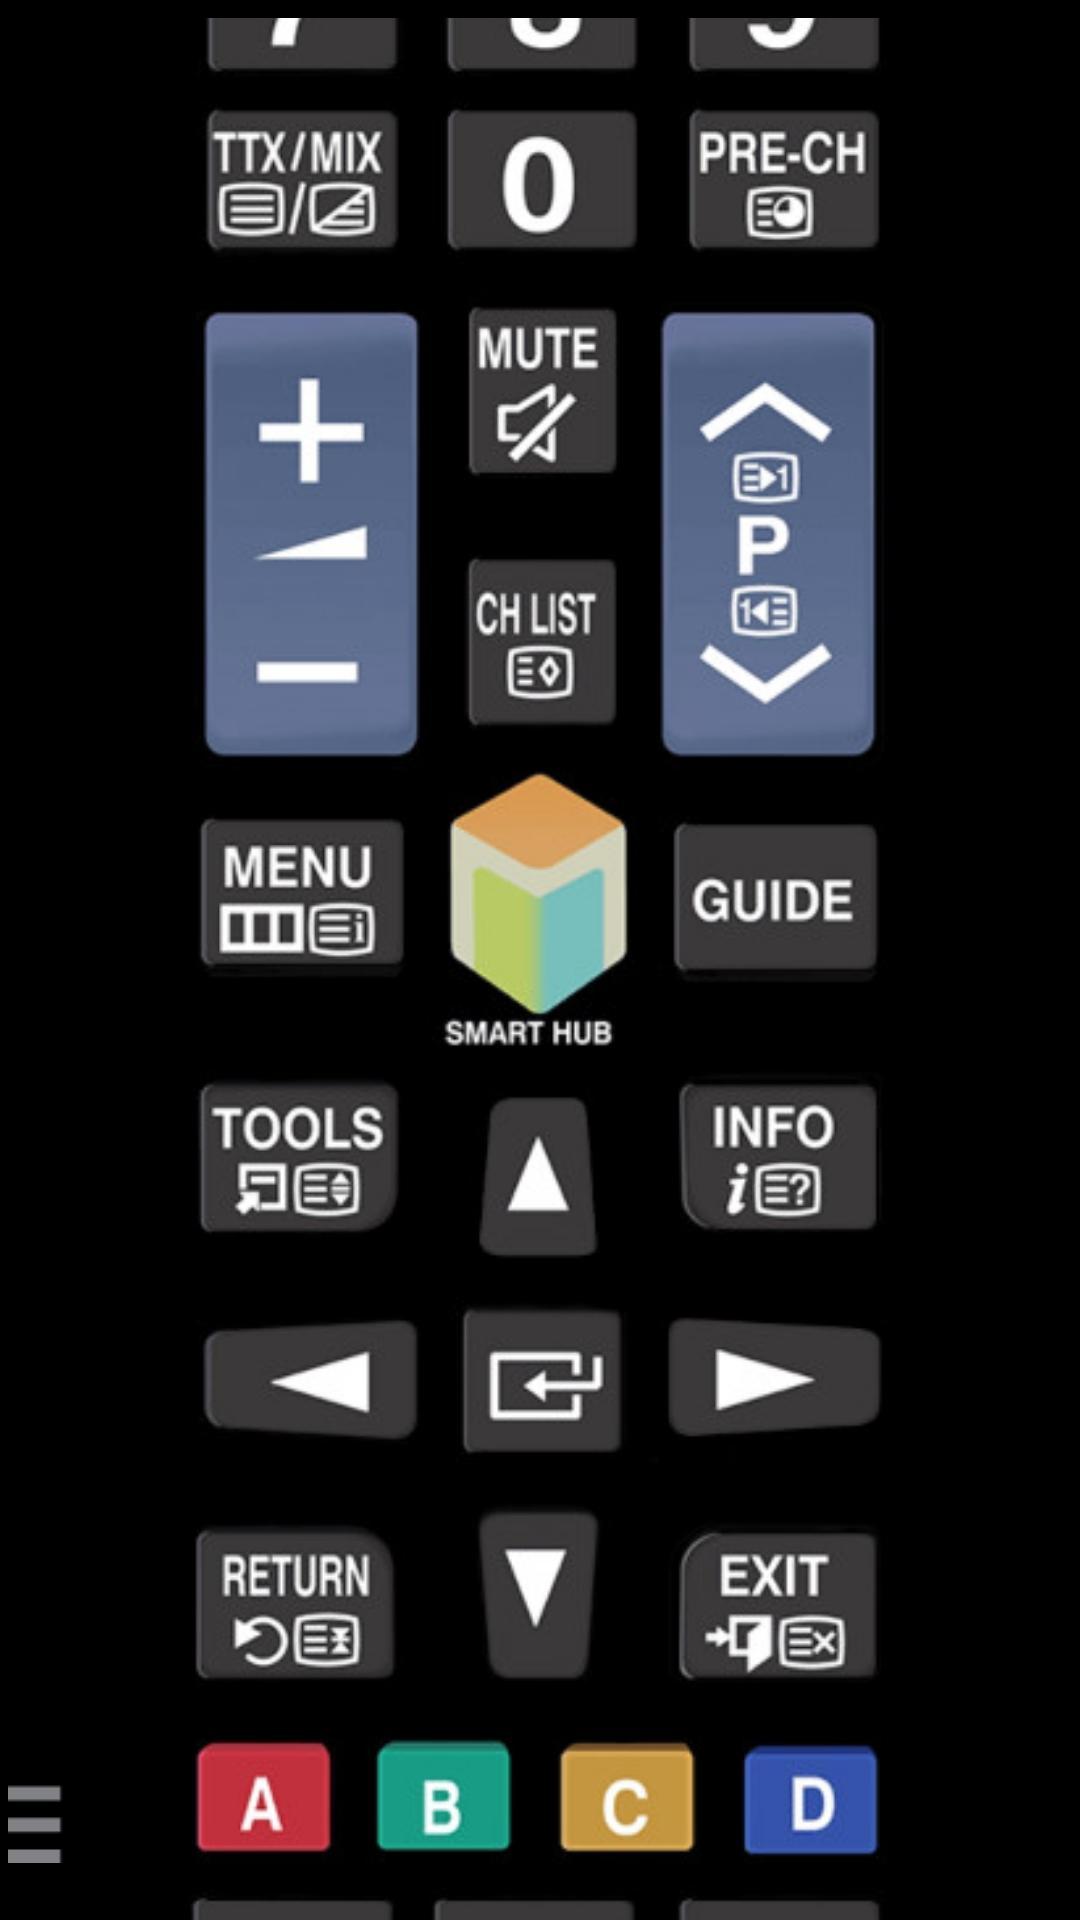 TV (Samsung) Remote Control for Android - APK Download